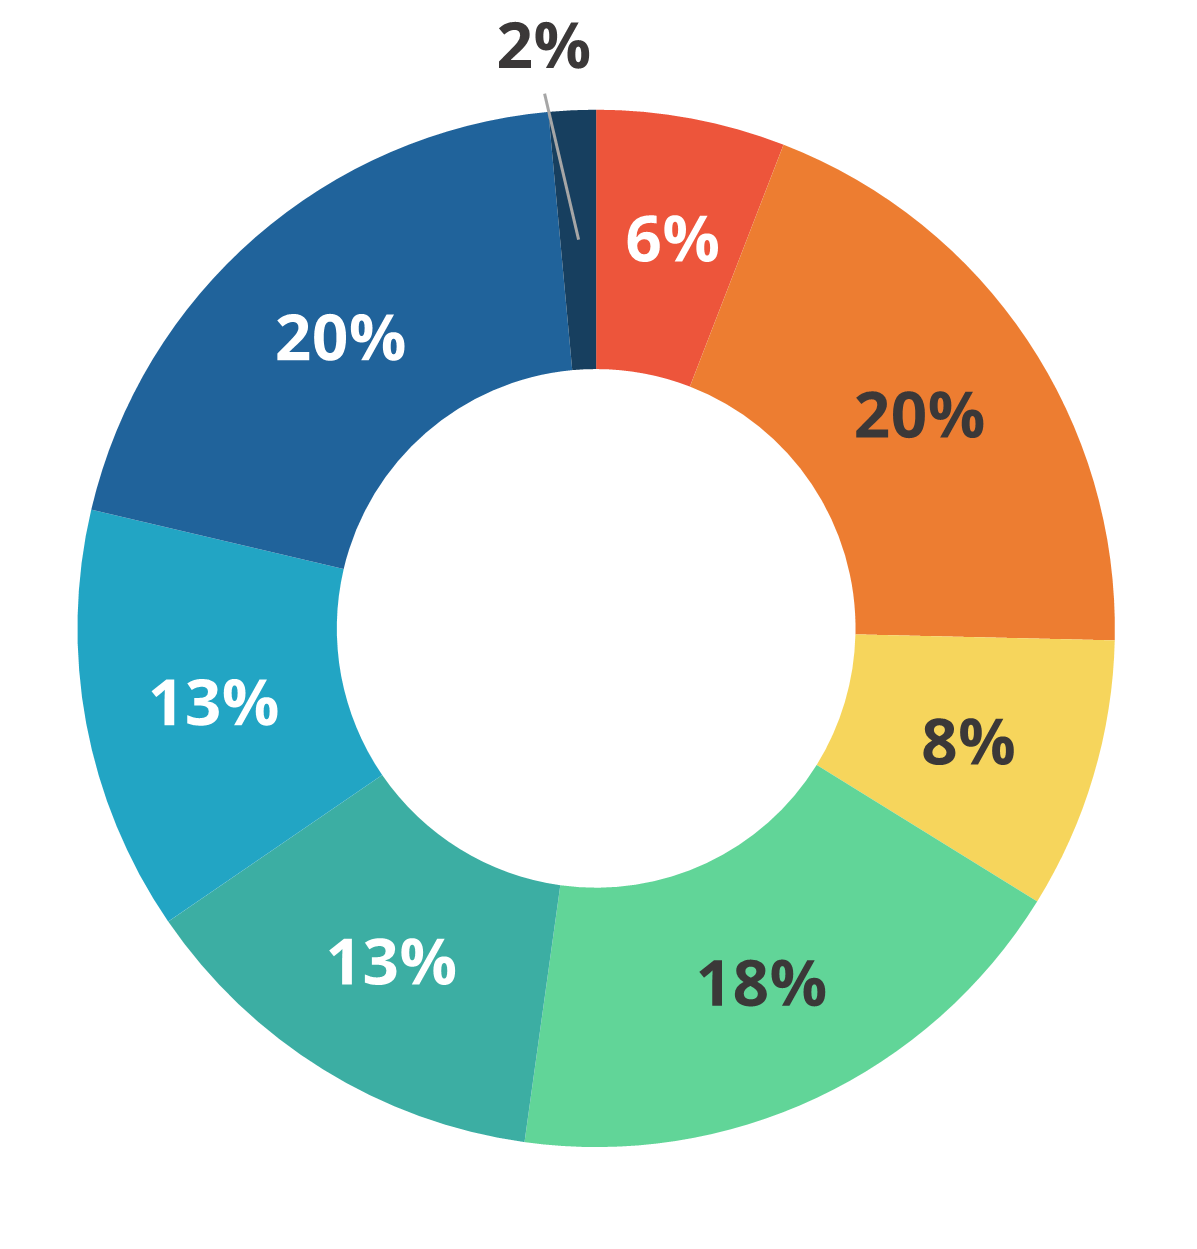 Donut graph: 6% ITS Help Desk/Support Centre; 20% Ventus Support Website; 8% Submit request to Educational Technology Student Support Team; 18% Faculty/Department Office; 13% Email to Ventus Educational Support (CTL); 13% Email to QSAS; 20% Email to Exams Office; 2% Other